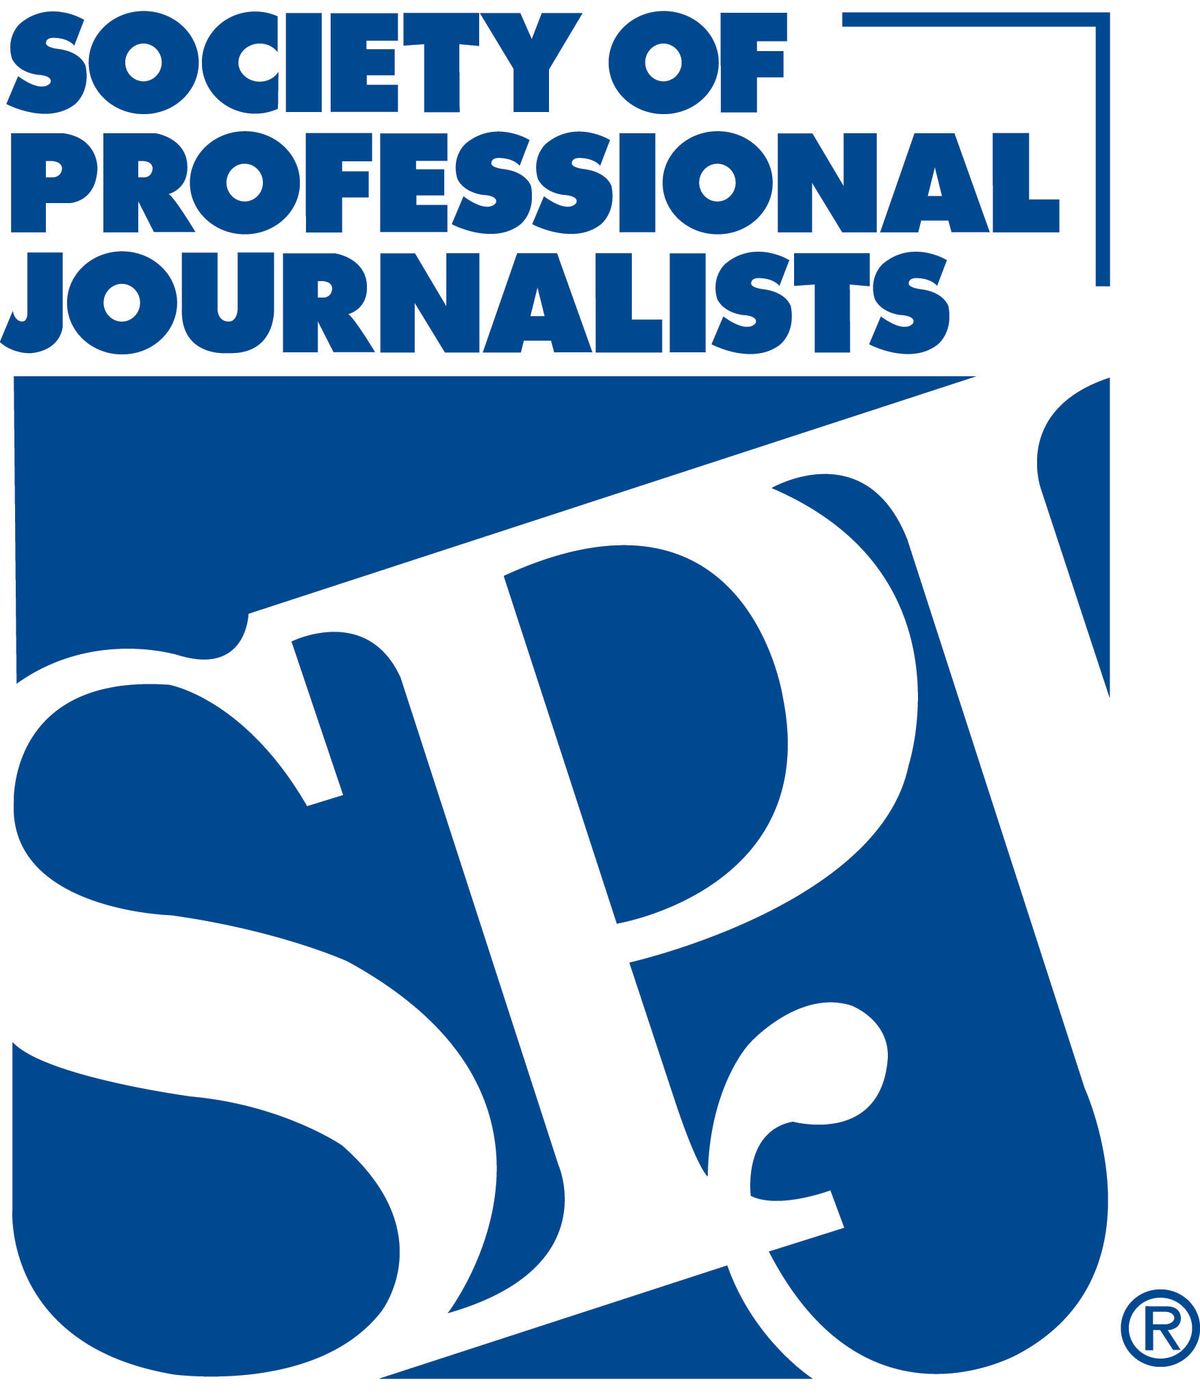 Society of Professional Journalists Code of ethics